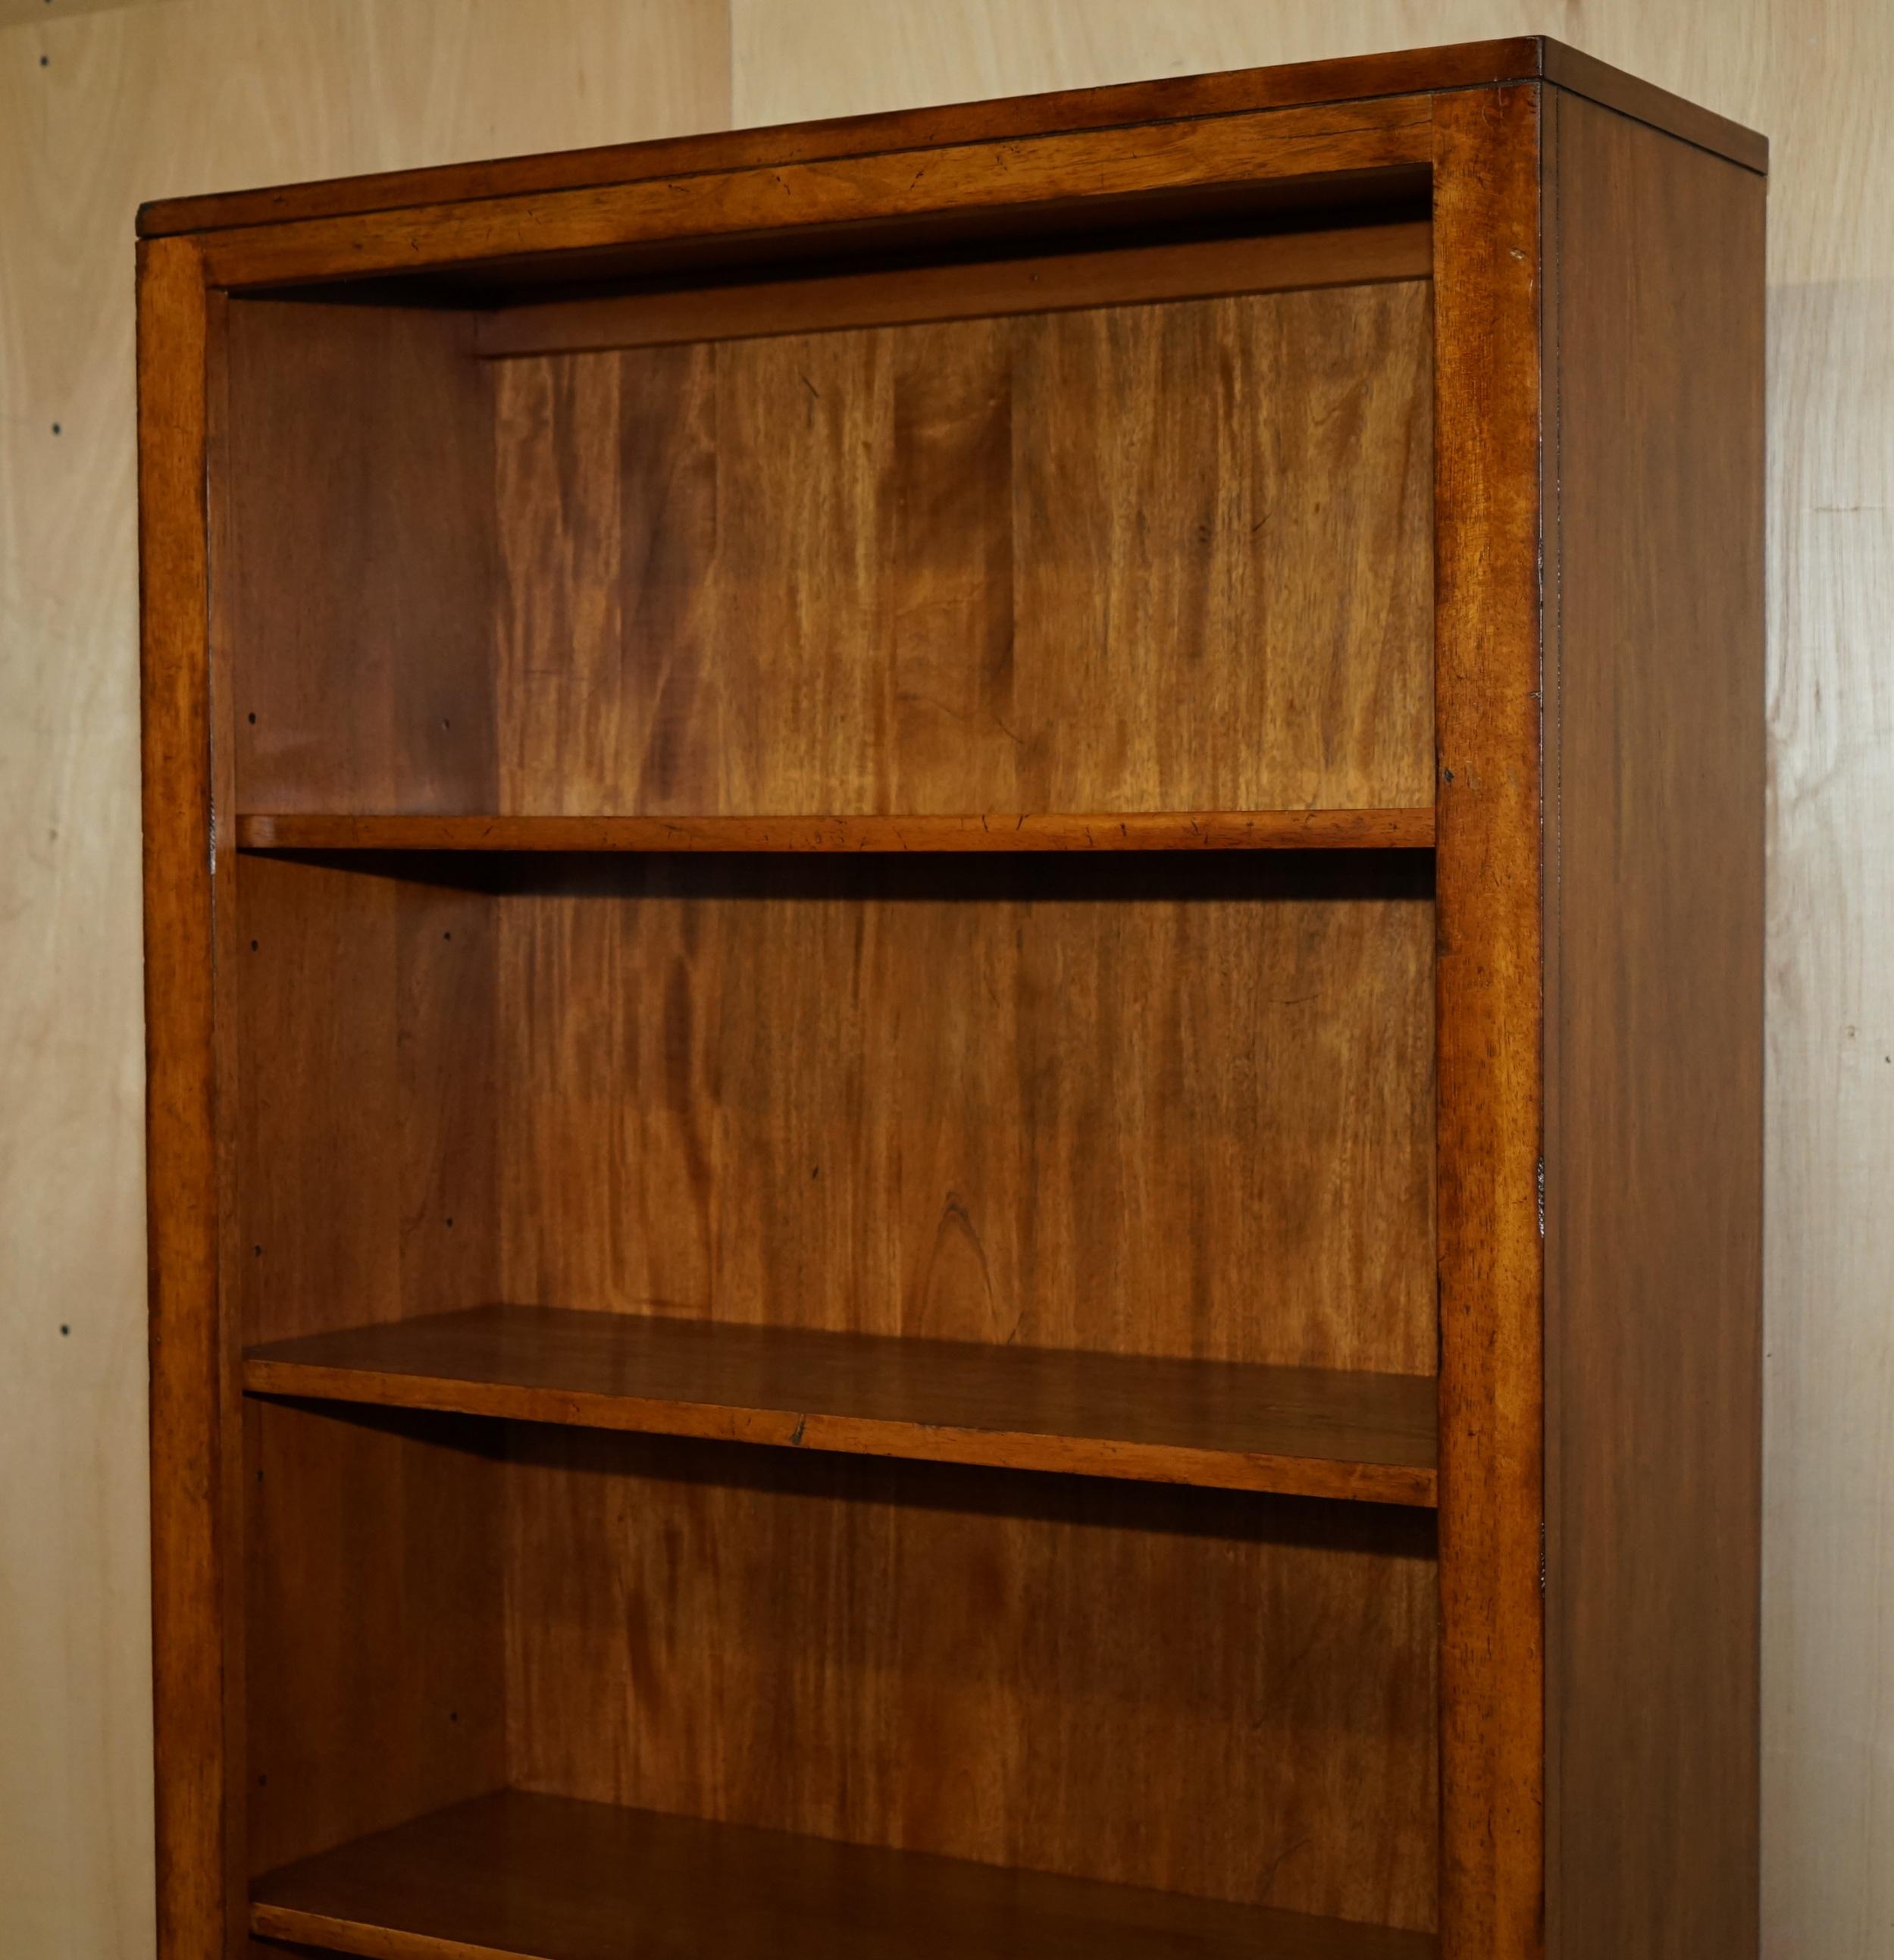 PAIR OF HARDWOOD FINISH TALL OPEN LIBRARY BOOKCASES BY THE DESiGNER ETHAN ALLEN 6